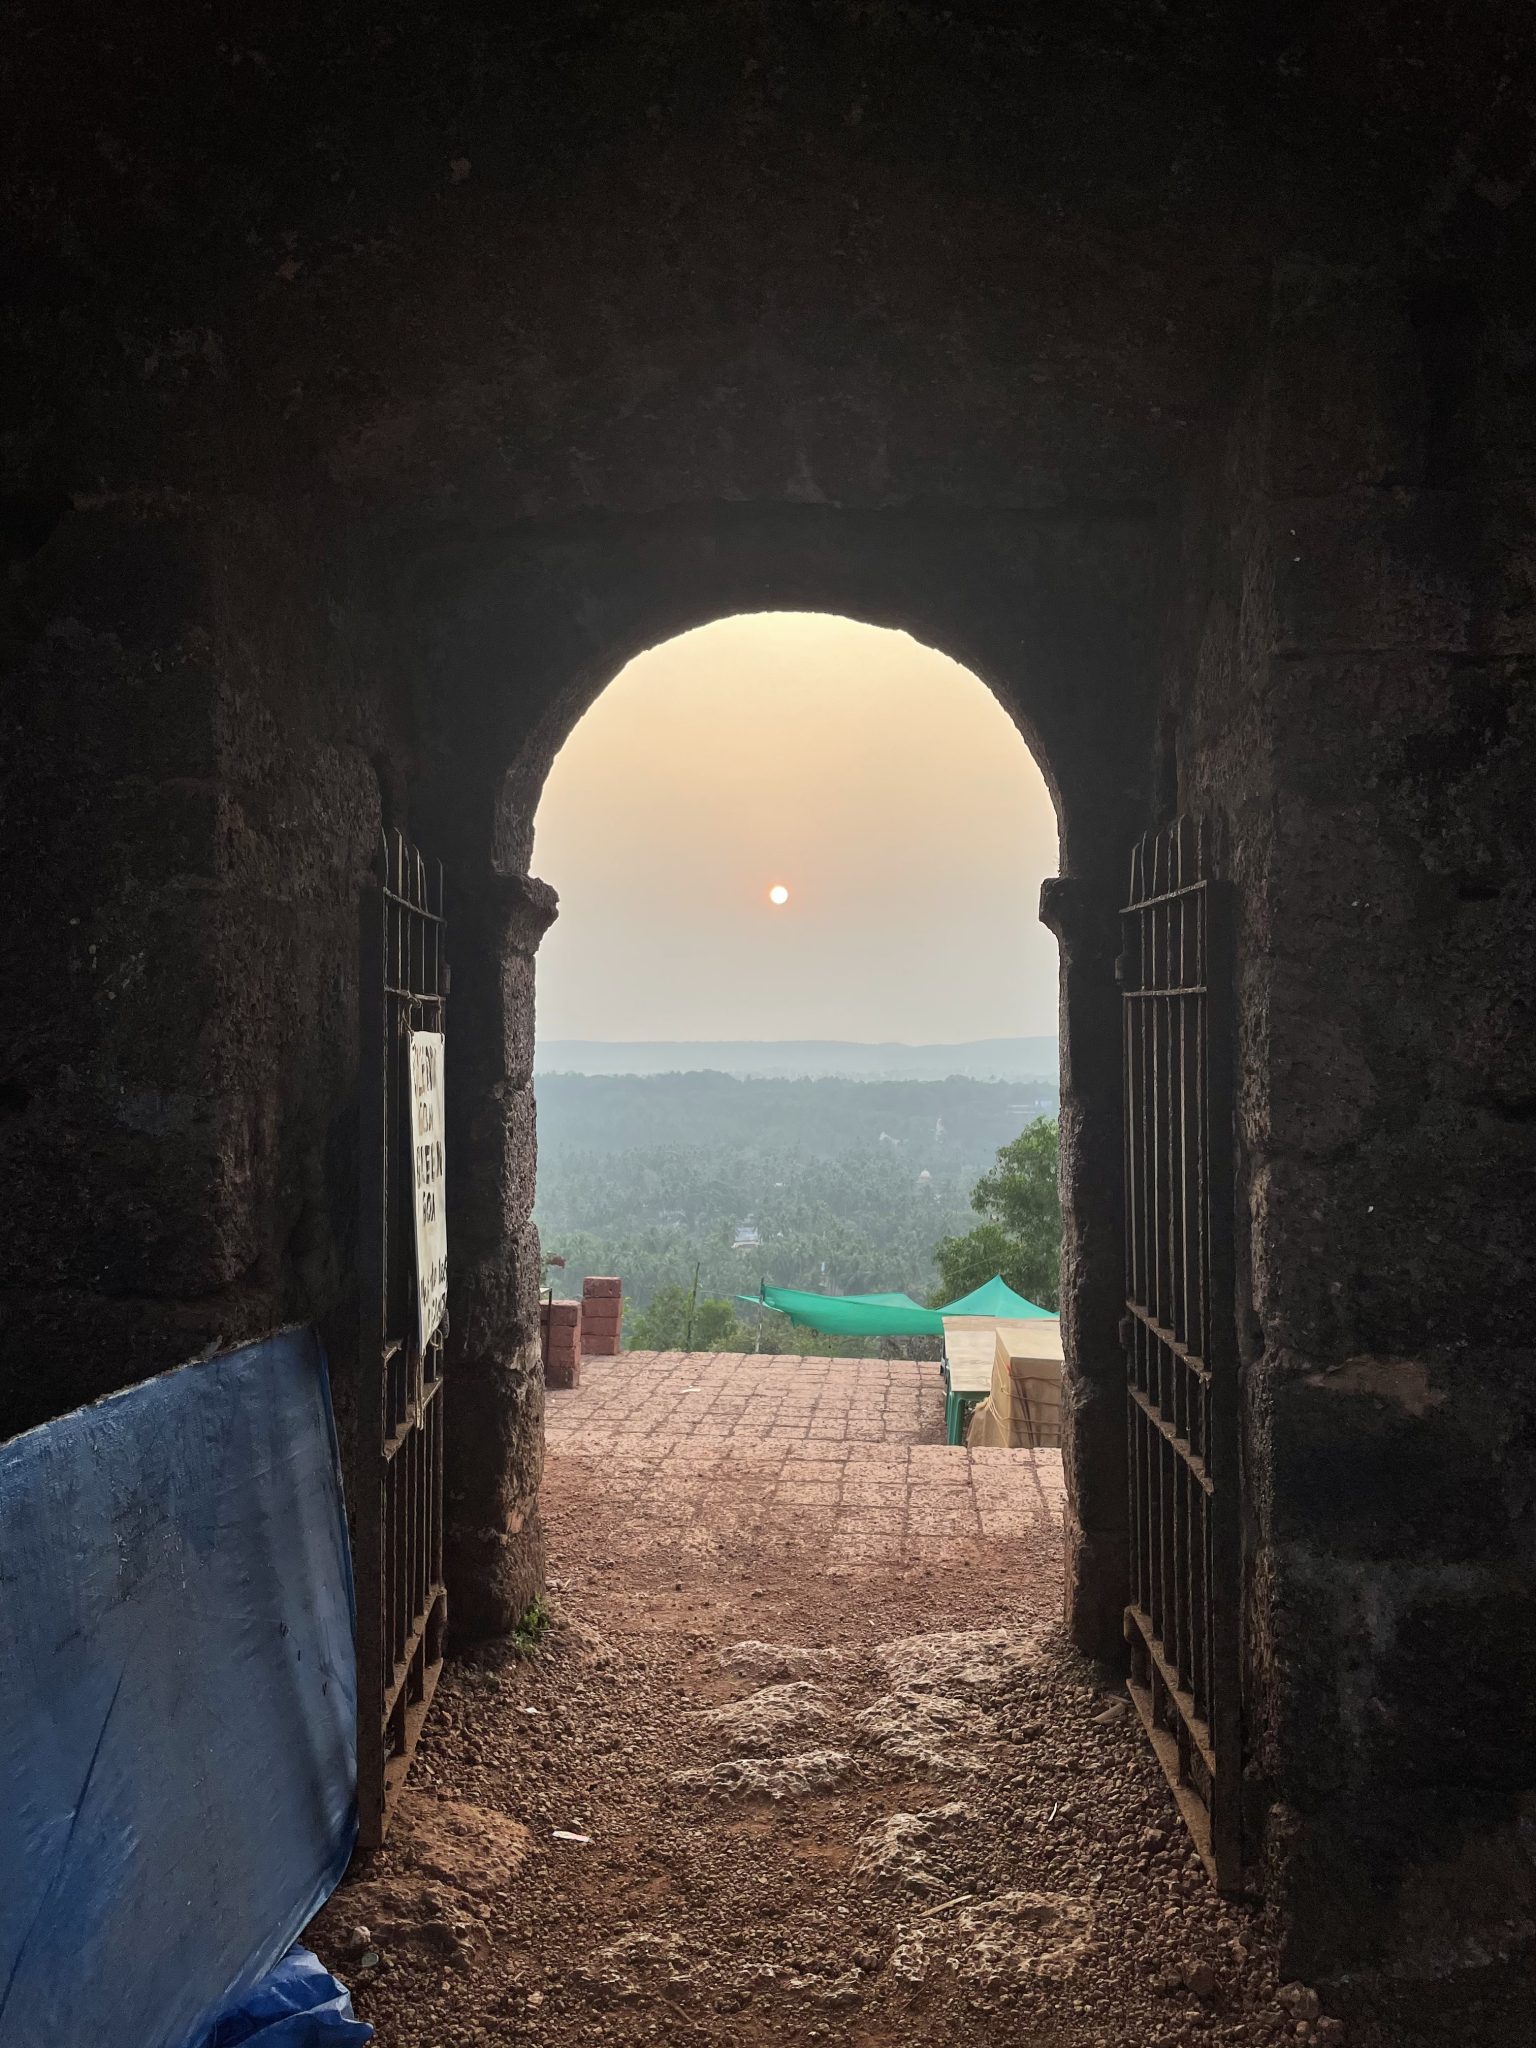 From the gates of Chapora Fort